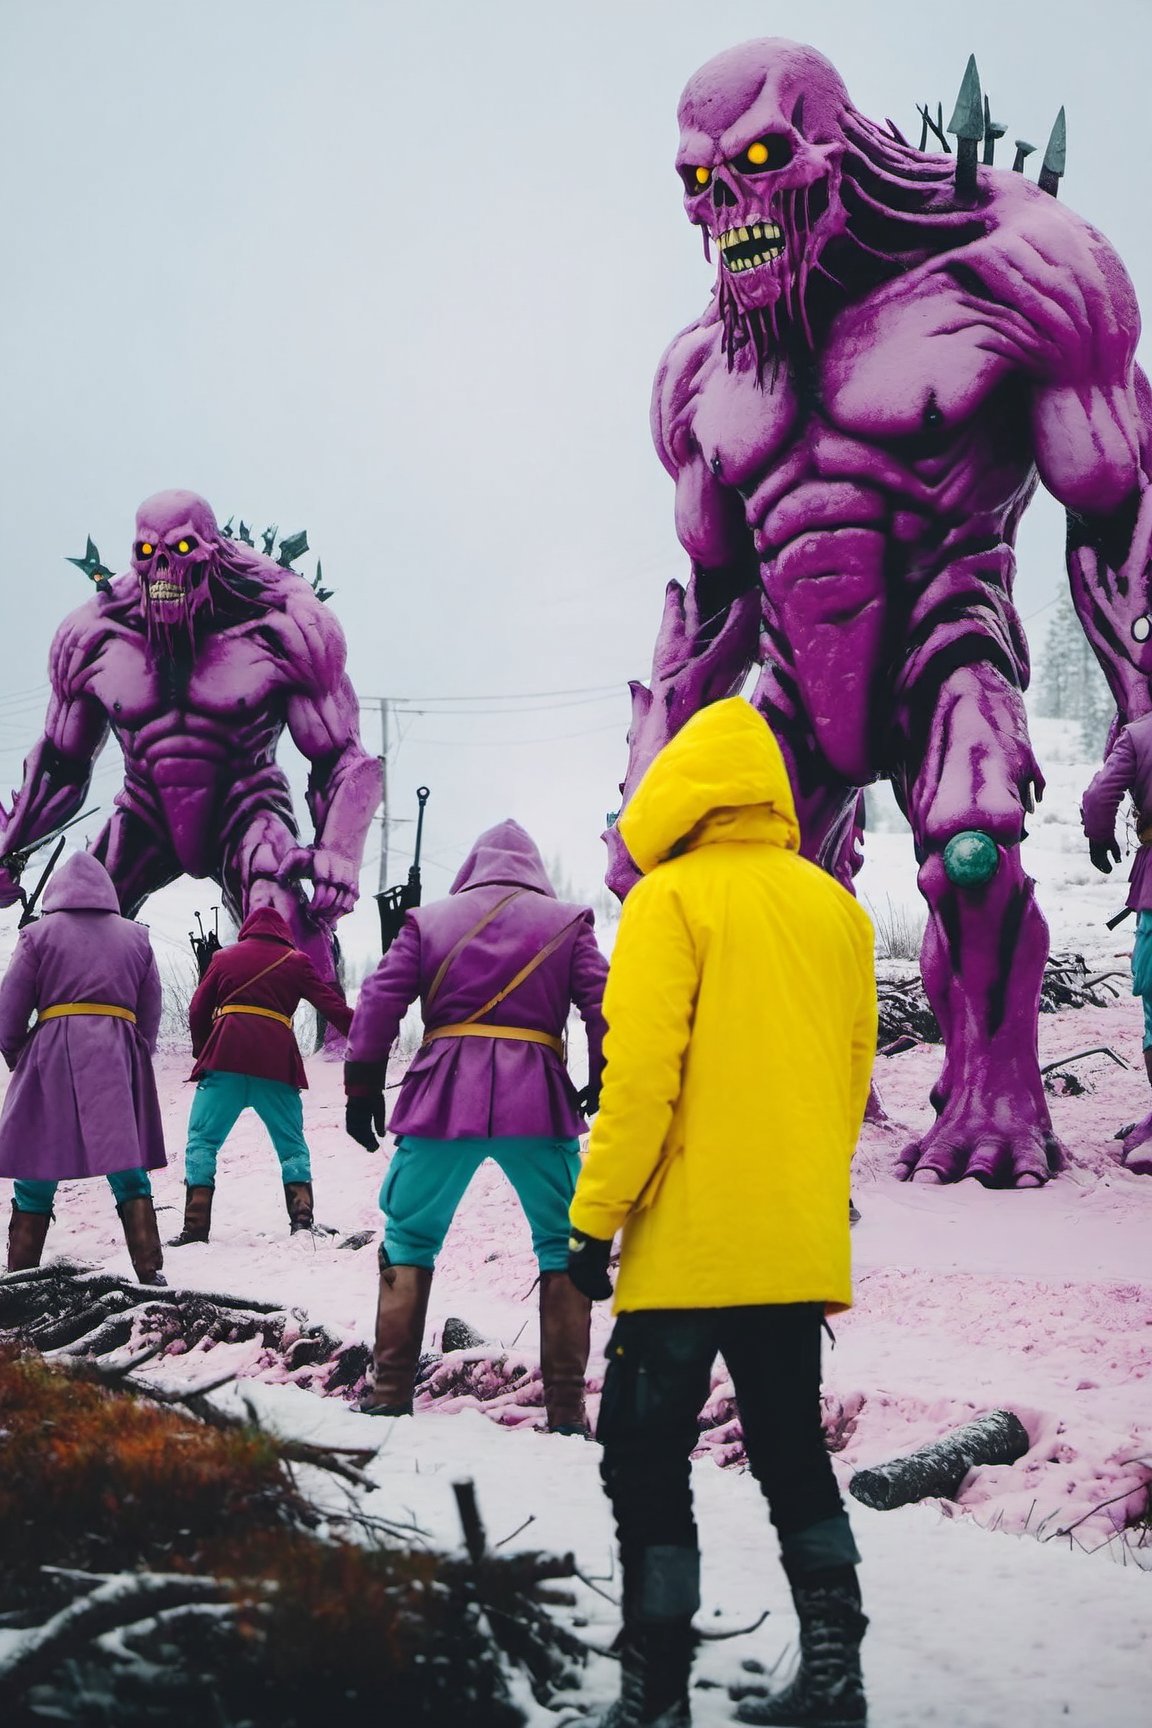 A (massive monster:1.2) looms in the background as a determined squad of militia valiantly charges into the foreground, (eerie, photo by simon stålenhag:1.3), (selective focus, breathtaking:1.4), (motion blur:0.5), high contrast, high saturation, desaturated purple and yellow details, epiCPhoto